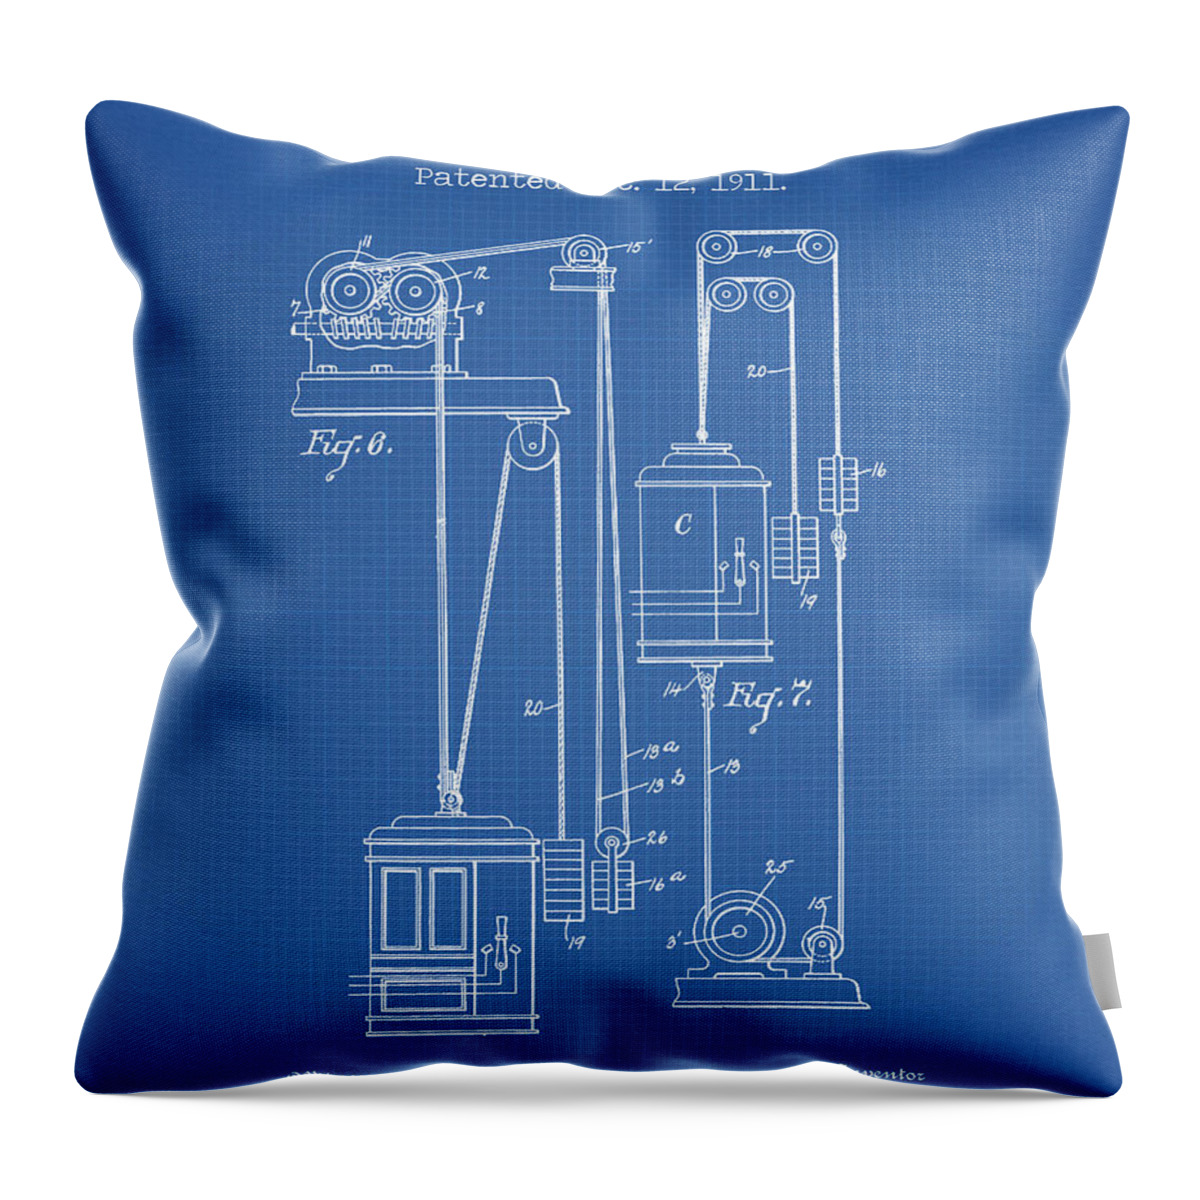 Elevator Patent Throw Pillow featuring the digital art Elevator patent #1 by Dennson Creative